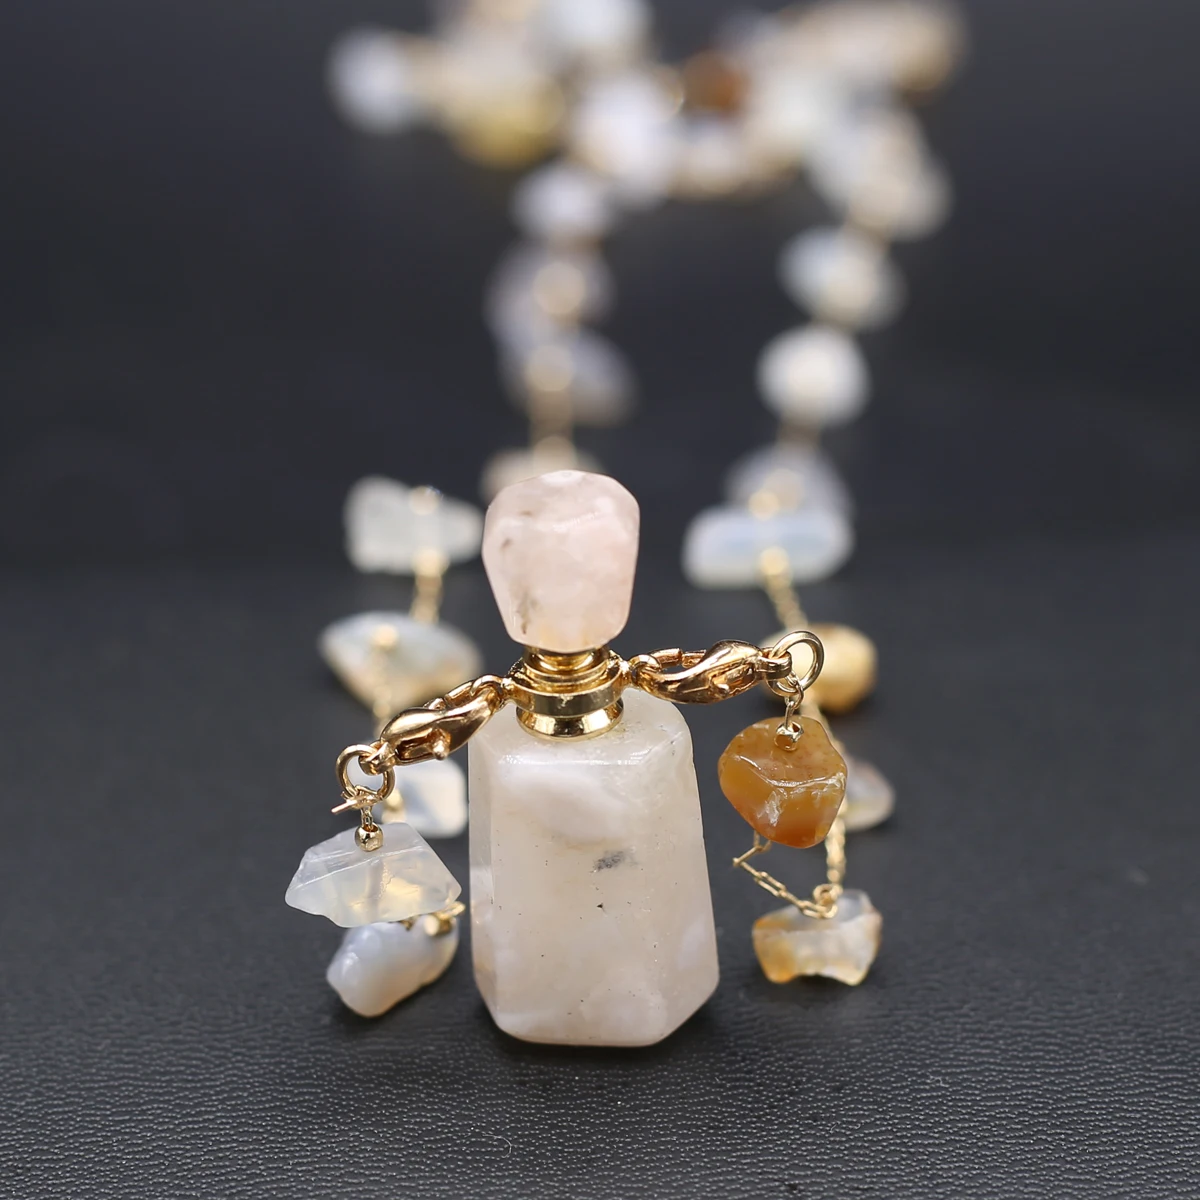 Natural Stone Cherry Flower Agate perfume Bottle Essential Oil Diffuser Pendant Necklace Gravel Chain Exquisite Gift for Women images - 6